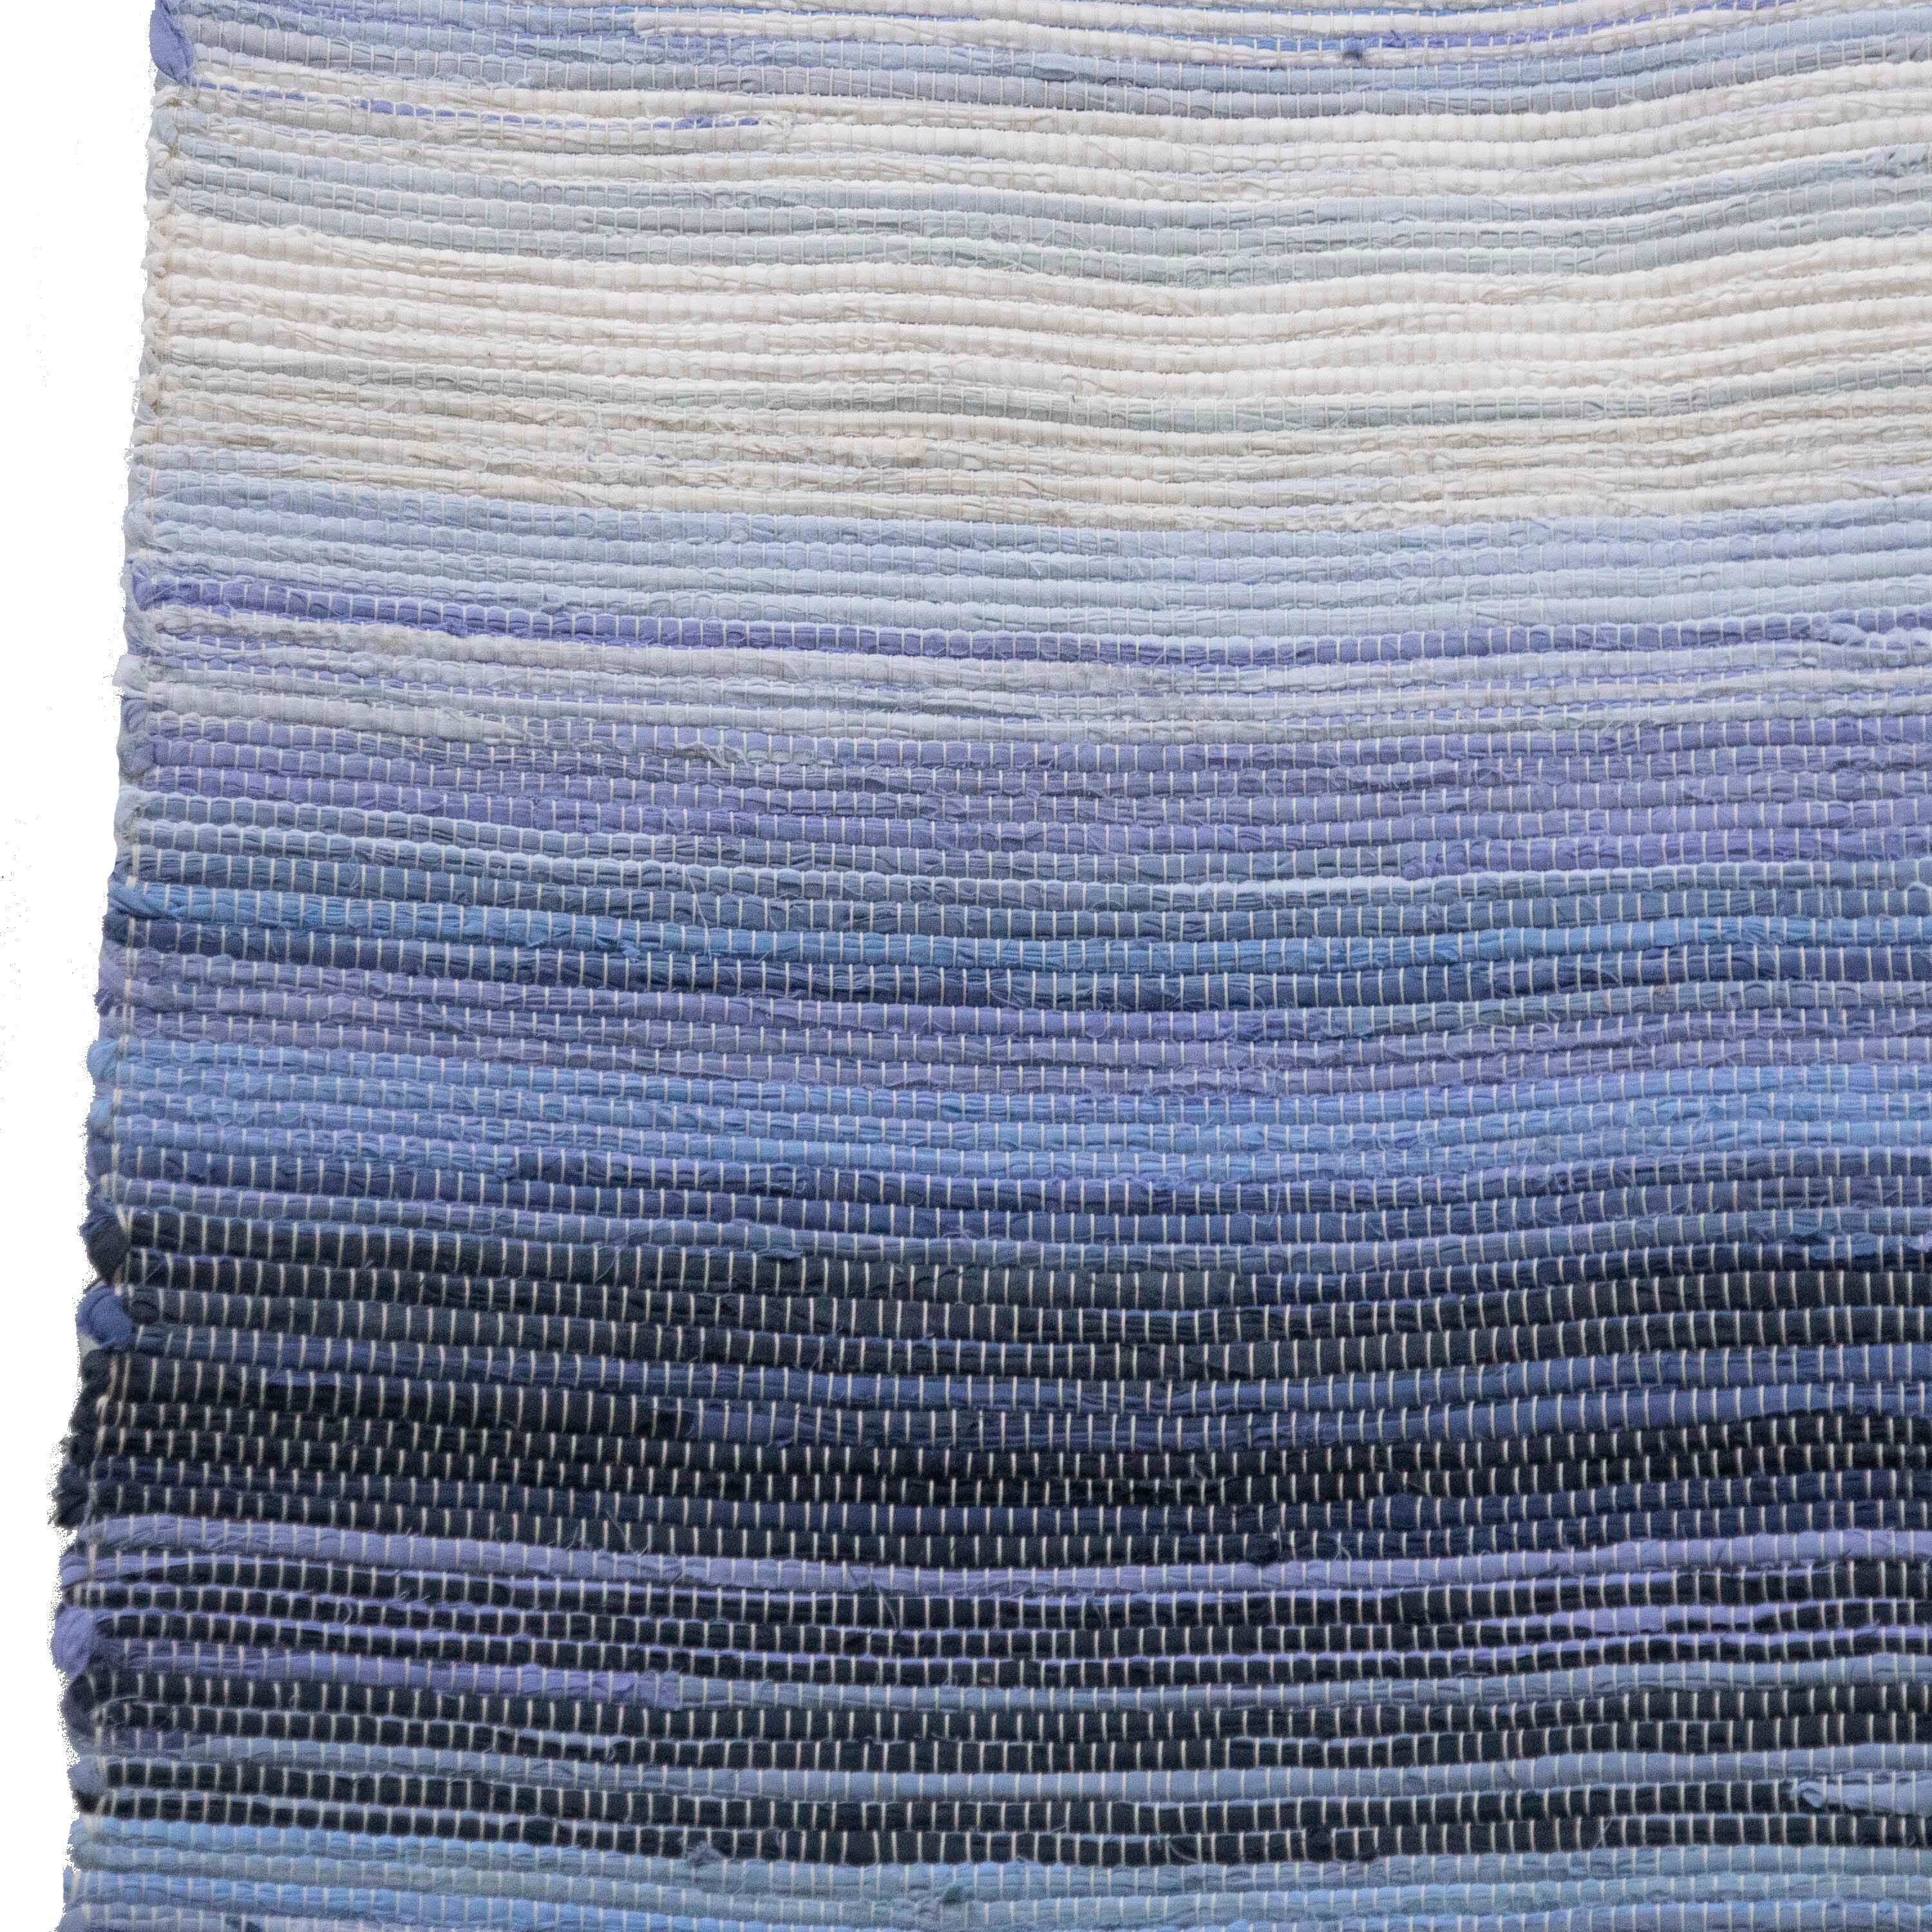 20th century Swedish rag rug. Featuring a large stripe design throughout in tones of blue and white. This rug can be machine-washed at 30 degrees.
RT6024490.